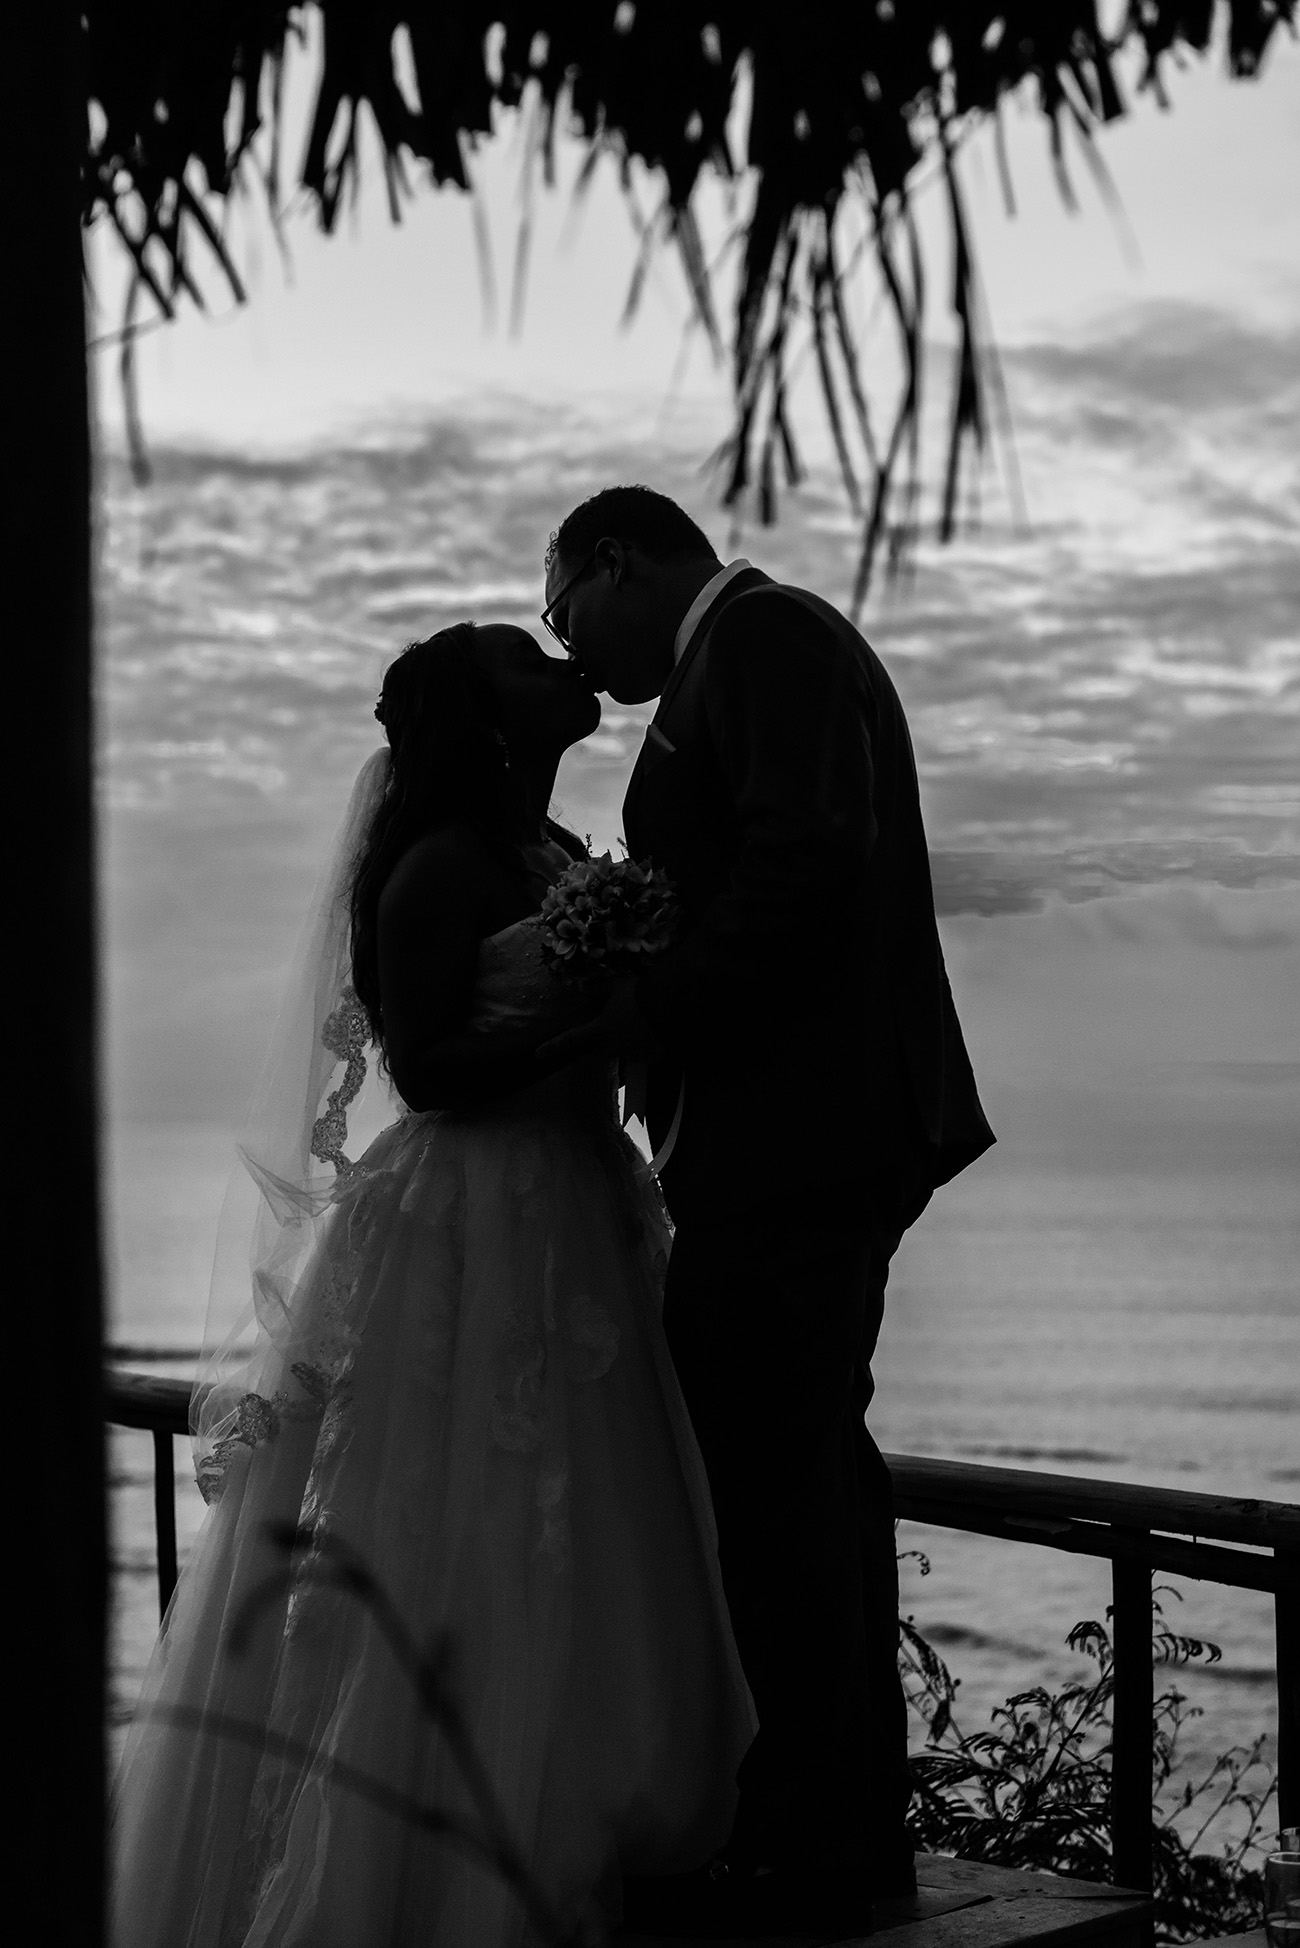 Silhouette of the bride and groom kissing black and white photograph. Ocean in the background. at Paradise Cove island resort in the Yasawas in Fiji photographed by Anais Photography